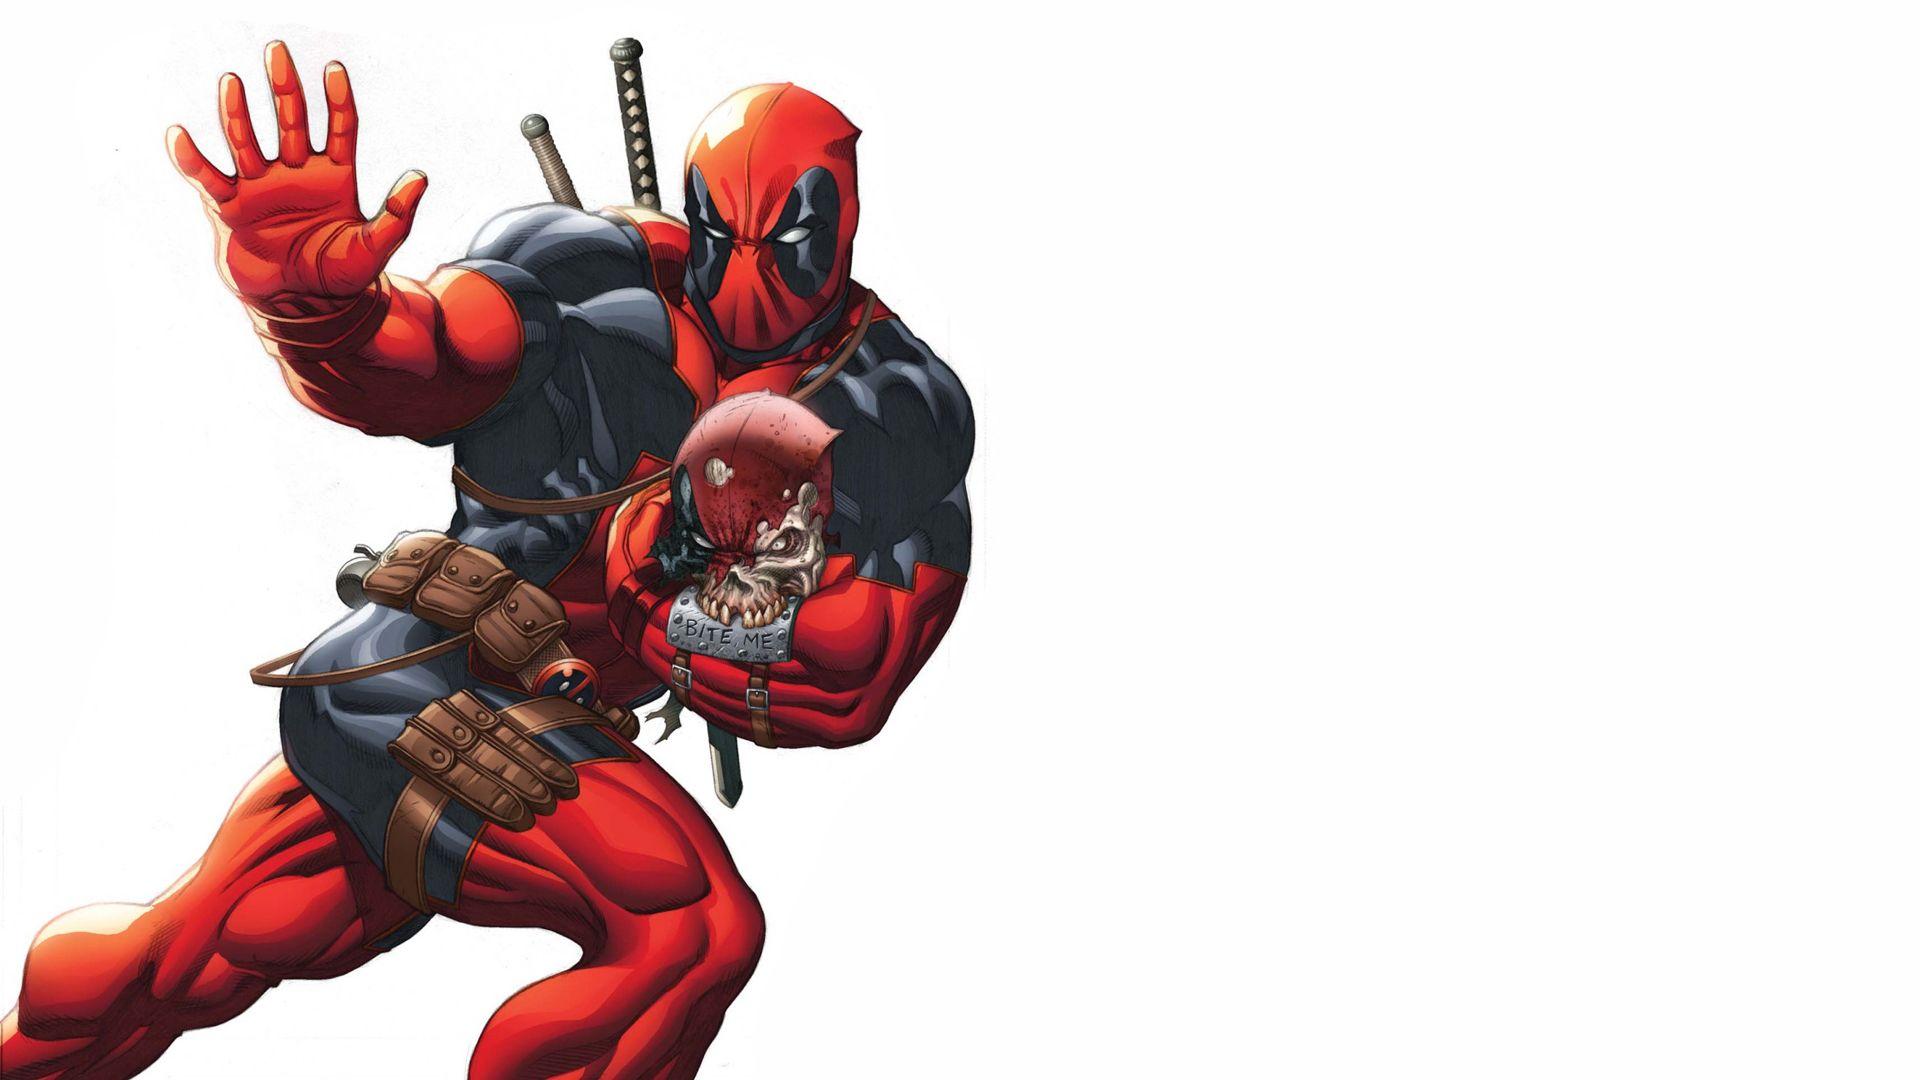 Spiderman Vs Deadpool HD Superheroes 4k Wallpapers Images Backgrounds  Photos and Pictures